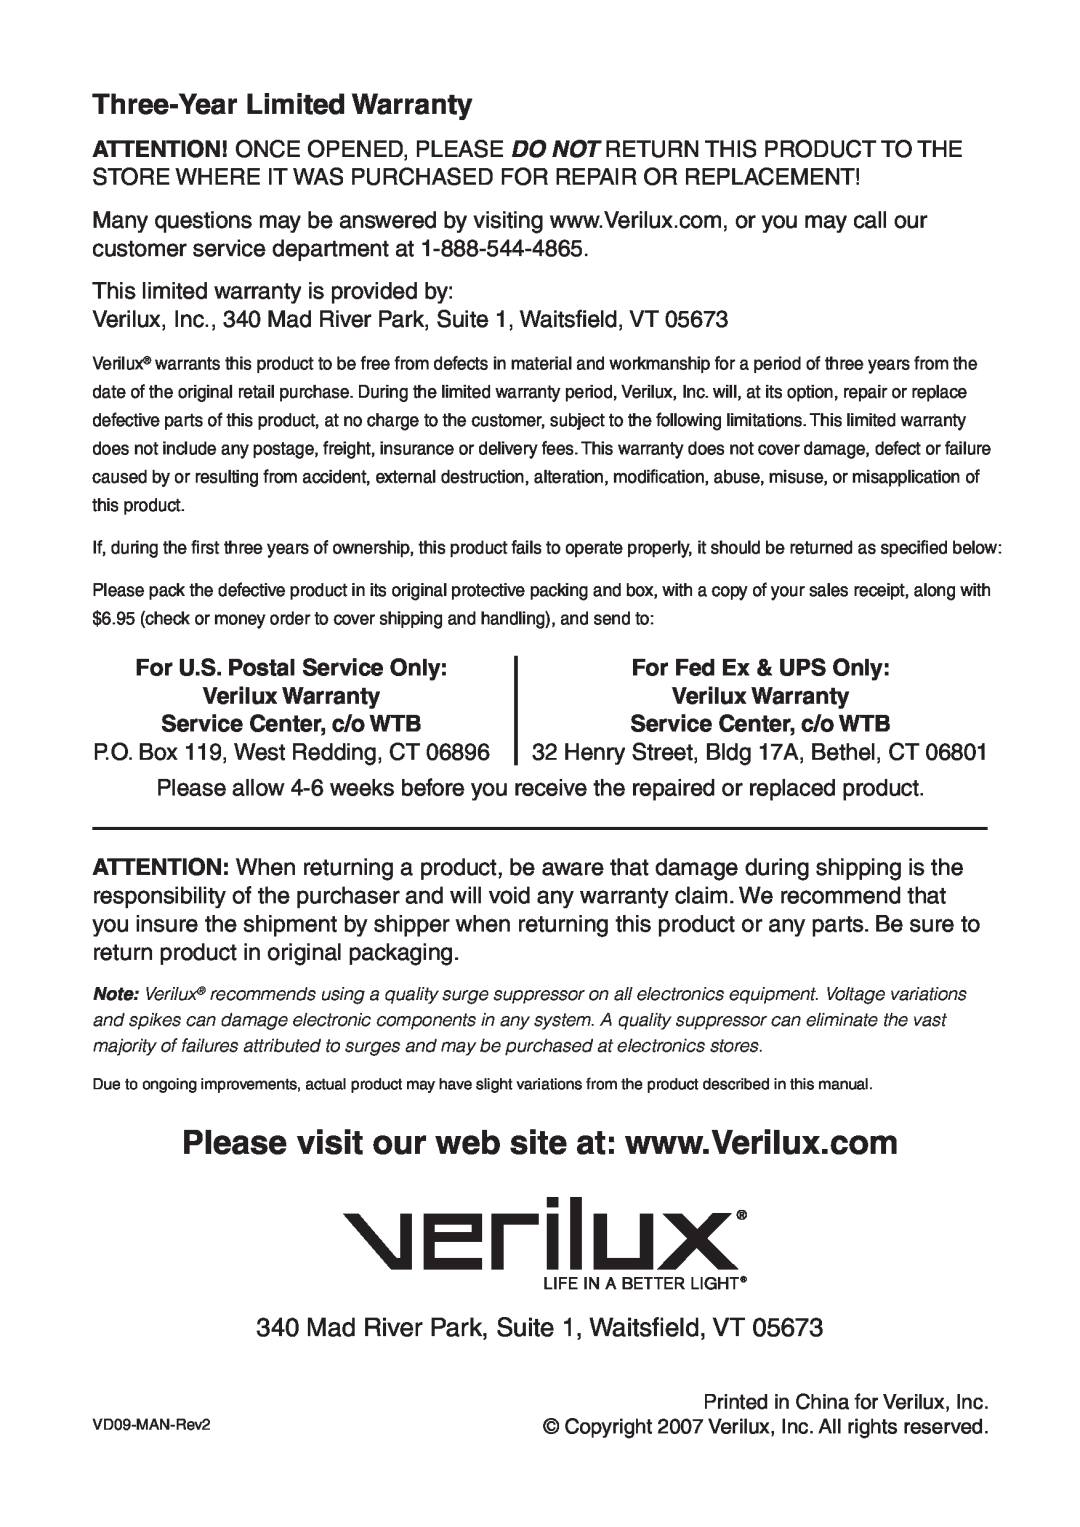 Verilux VD09 manual Three-YearLimited Warranty, Mad River Park, Suite 1, Waitsﬁeld, VT, Service Center, c/o WTB 